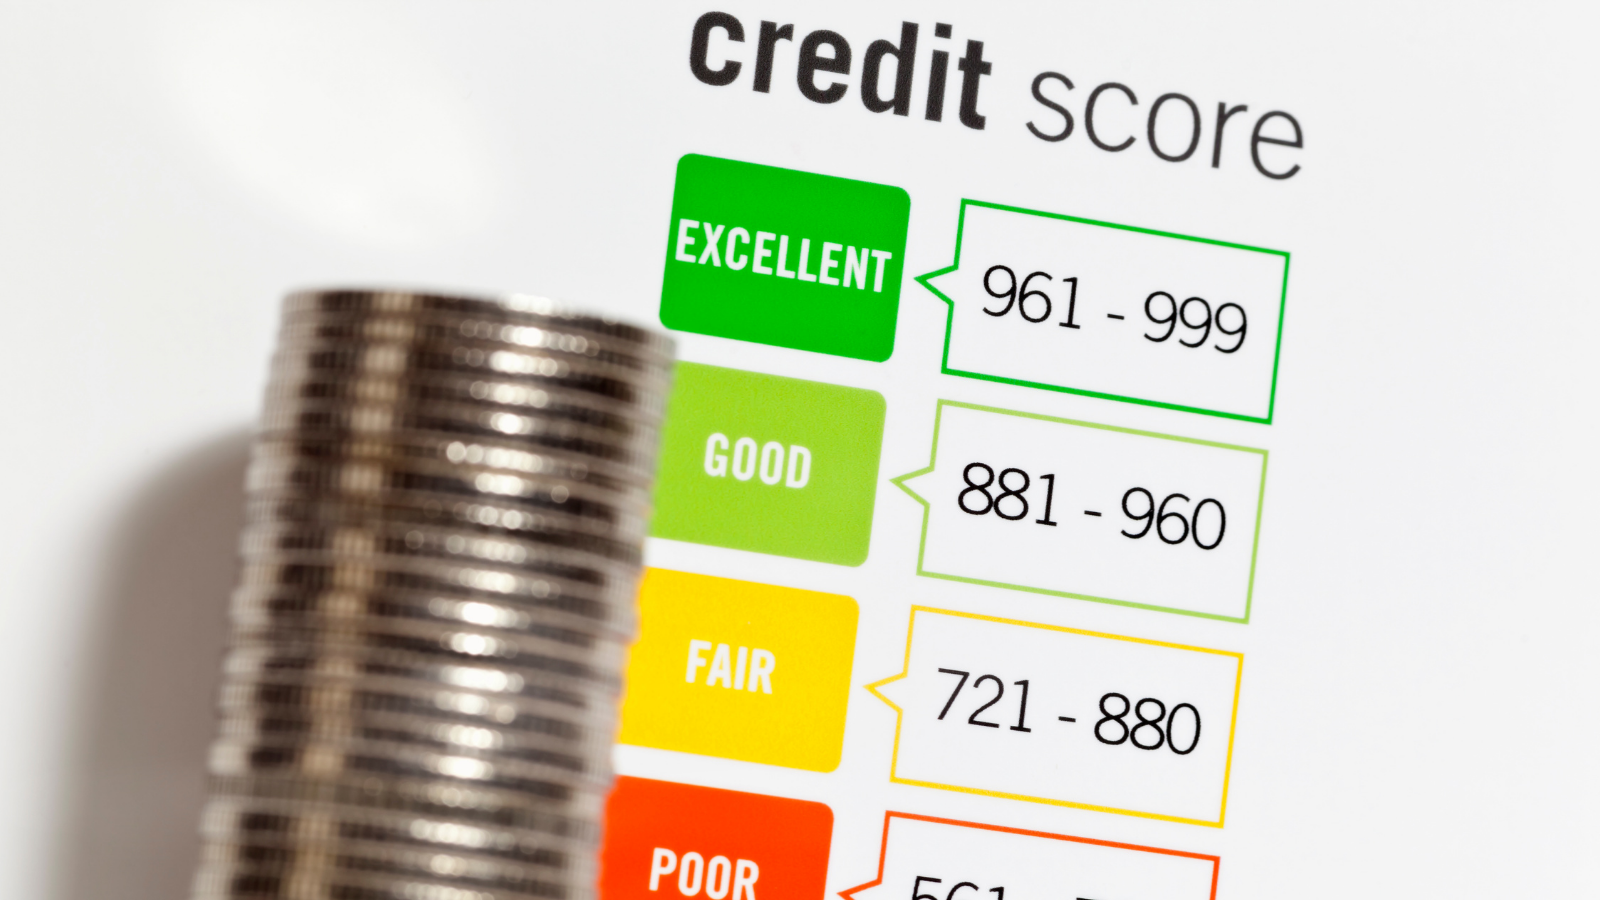 Image of a document detailing different credit scores and their associated ranking. Alongside the document is a stack of quarters.